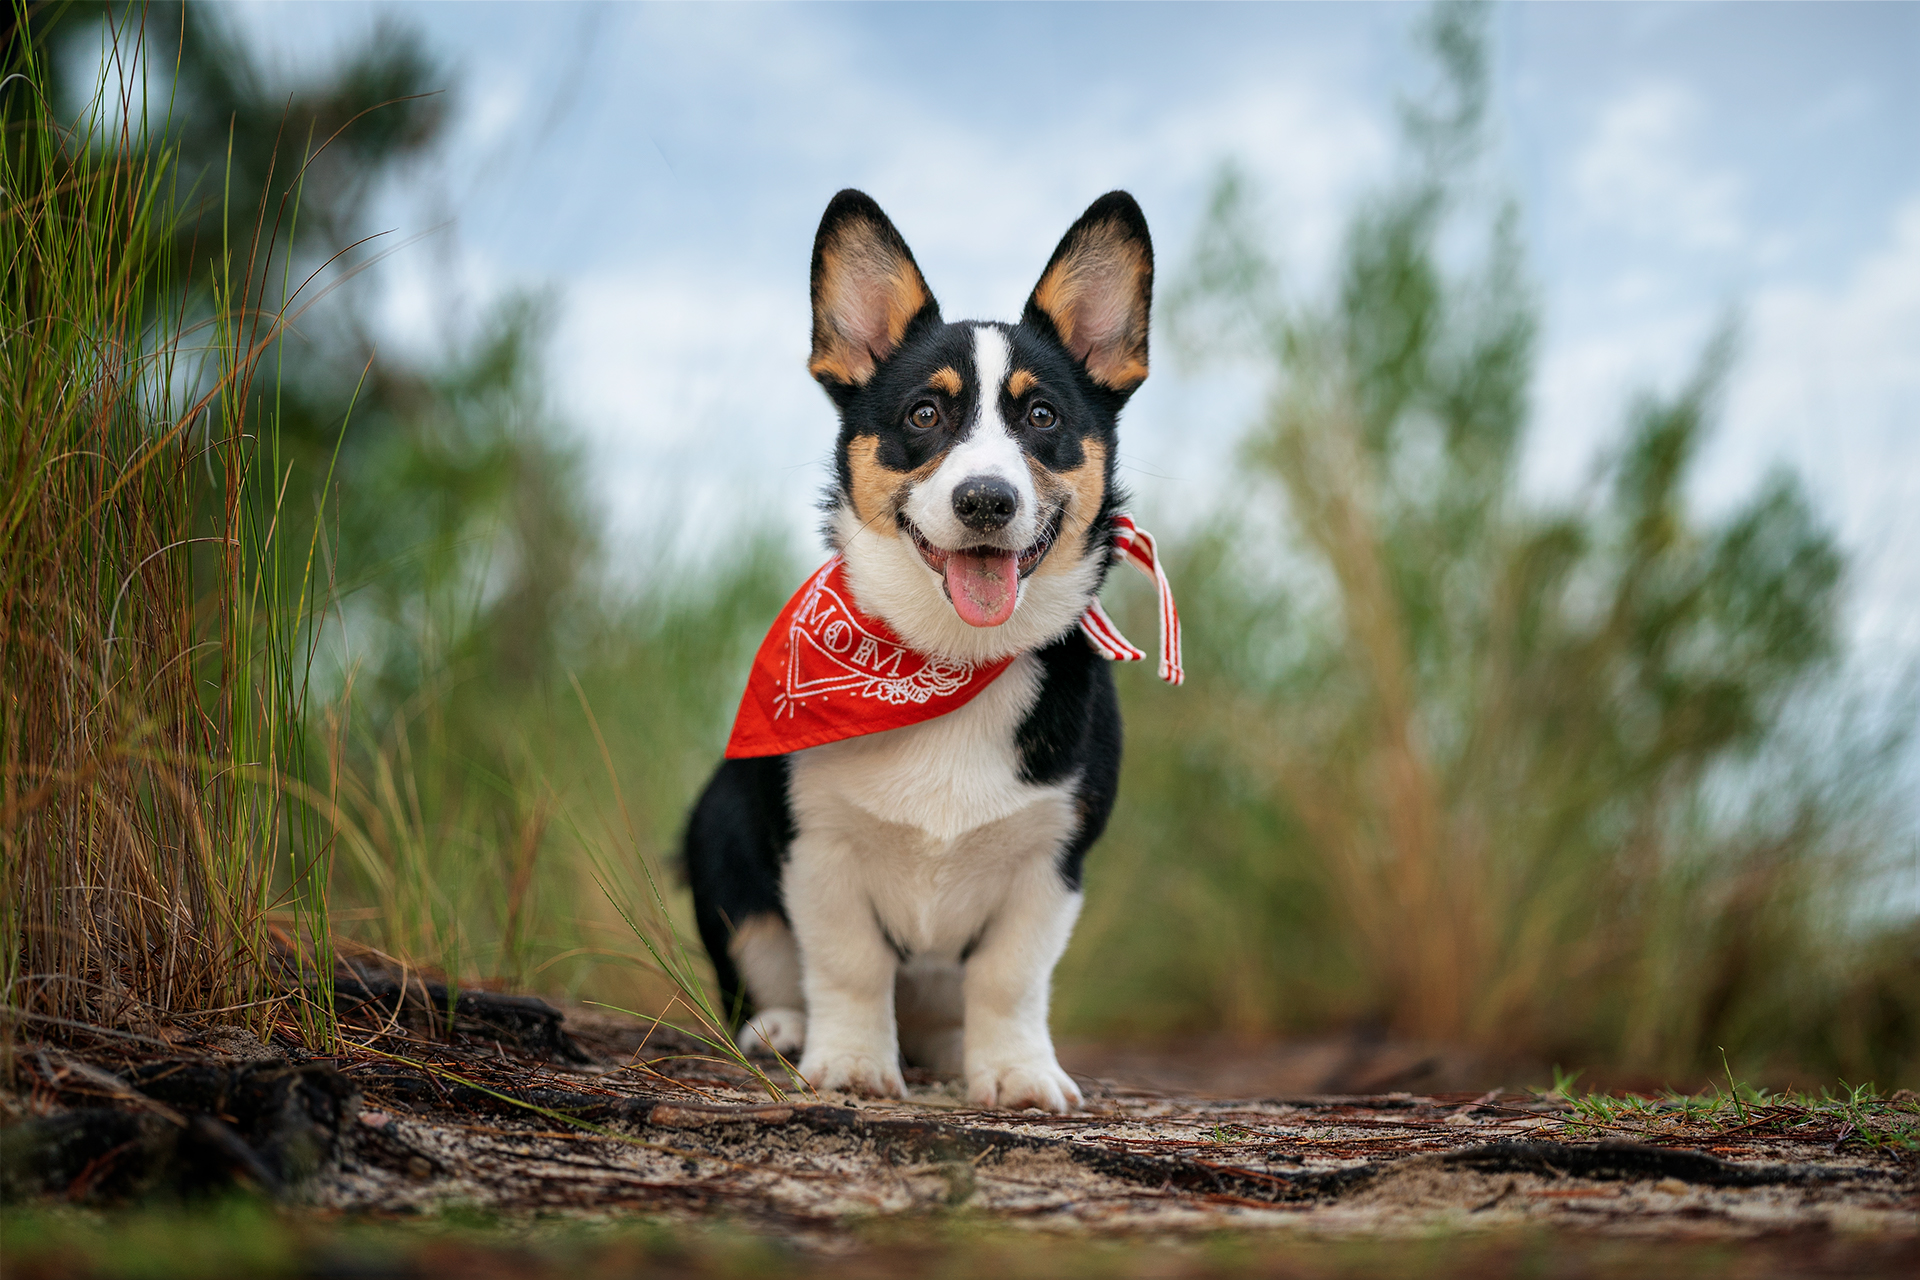 A corgi puppy poses in a forest background